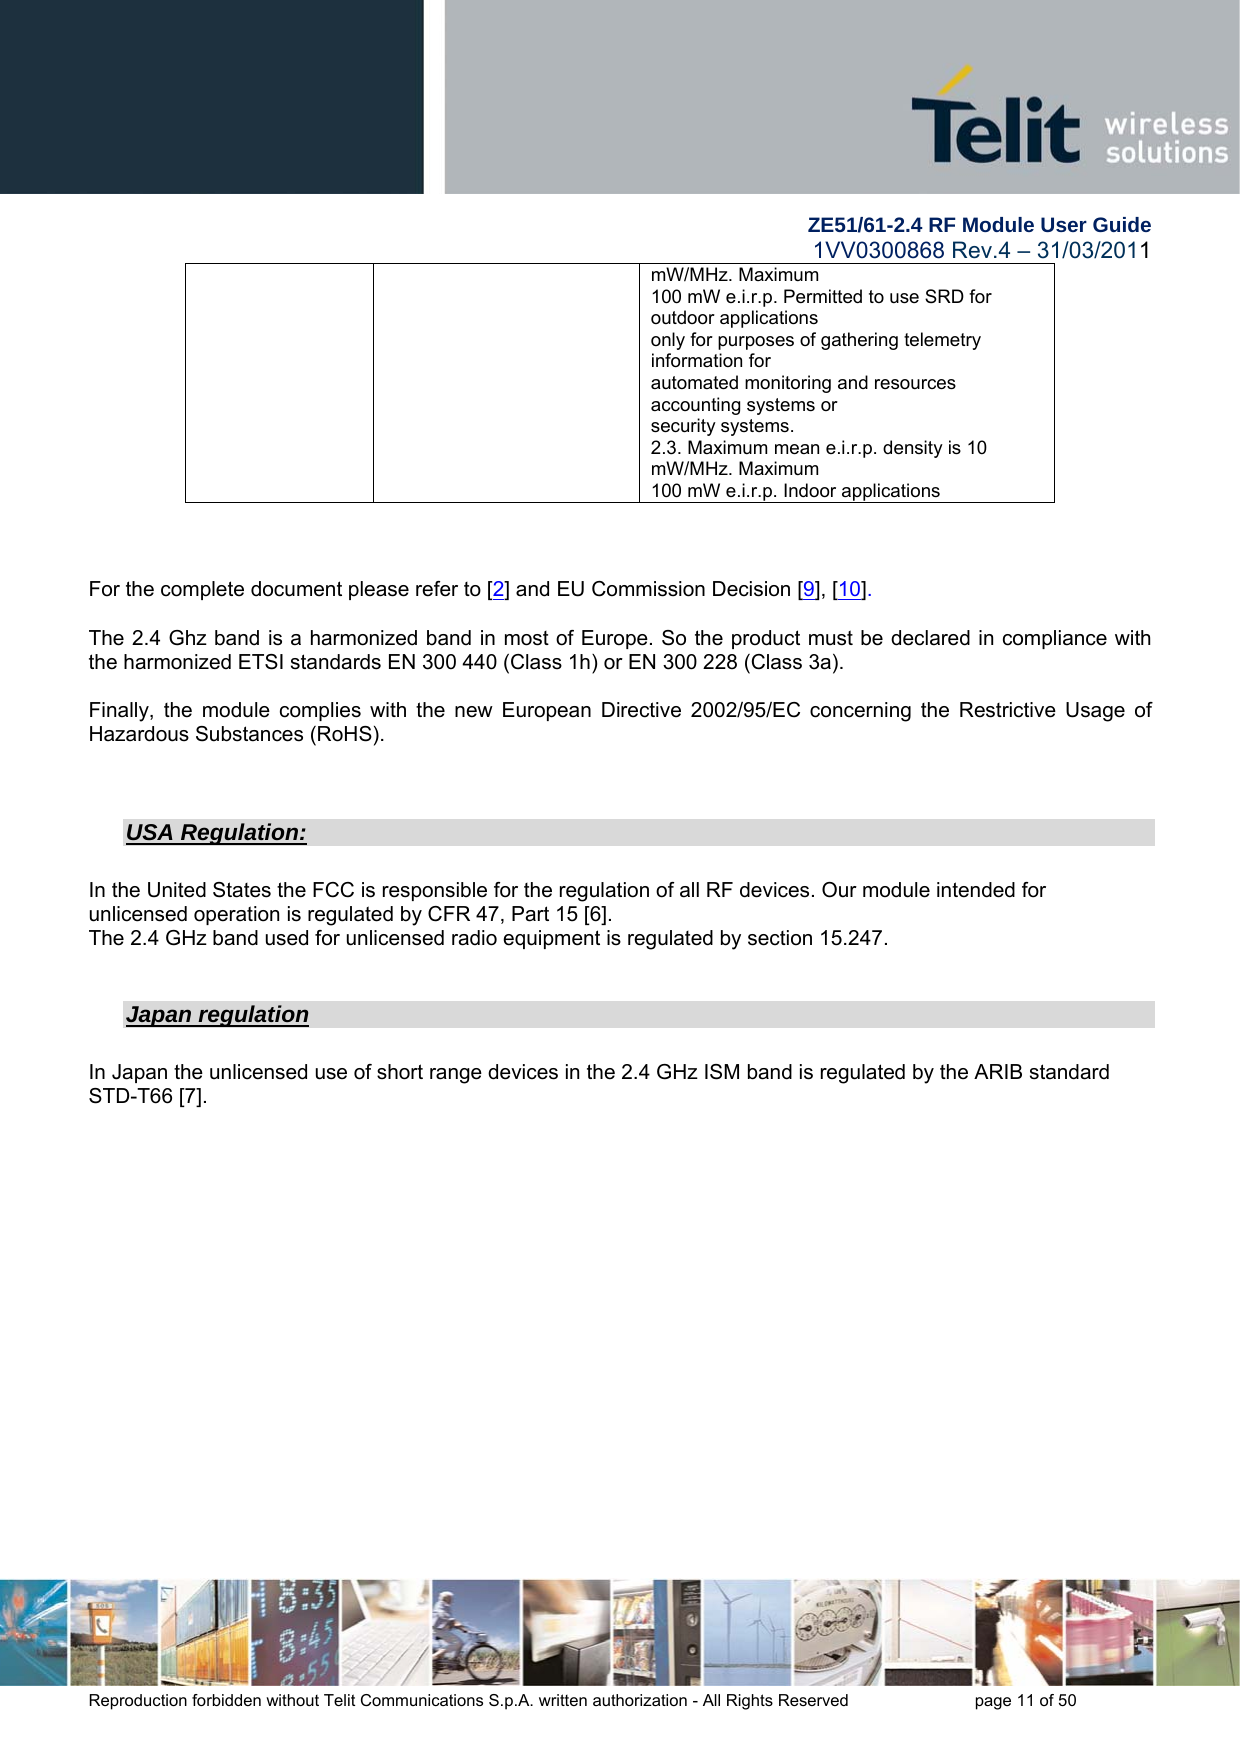        ZE51/61-2.4 RF Module User Guide 1VV0300868 Rev.4 – 31/03/2011 Reproduction forbidden without Telit Communications S.p.A. written authorization - All Rights Reserved    page 11 of 50 mW/MHz. Maximum 100 mW e.i.r.p. Permitted to use SRD for outdoor applications only for purposes of gathering telemetry information for automated monitoring and resources accounting systems or security systems. 2.3. Maximum mean e.i.r.p. density is 10 mW/MHz. Maximum 100 mW e.i.r.p. Indoor applications    For the complete document please refer to [2] and EU Commission Decision [9], [10].  The 2.4 Ghz band is a harmonized band in most of Europe. So the product must be declared in compliance with the harmonized ETSI standards EN 300 440 (Class 1h) or EN 300 228 (Class 3a).  Finally, the module complies with the new European Directive 2002/95/EC concerning the Restrictive Usage of Hazardous Substances (RoHS).   USA Regulation:  In the United States the FCC is responsible for the regulation of all RF devices. Our module intended for unlicensed operation is regulated by CFR 47, Part 15 [6]. The 2.4 GHz band used for unlicensed radio equipment is regulated by section 15.247.  Japan regulation  In Japan the unlicensed use of short range devices in the 2.4 GHz ISM band is regulated by the ARIB standard STD-T66 [7].  